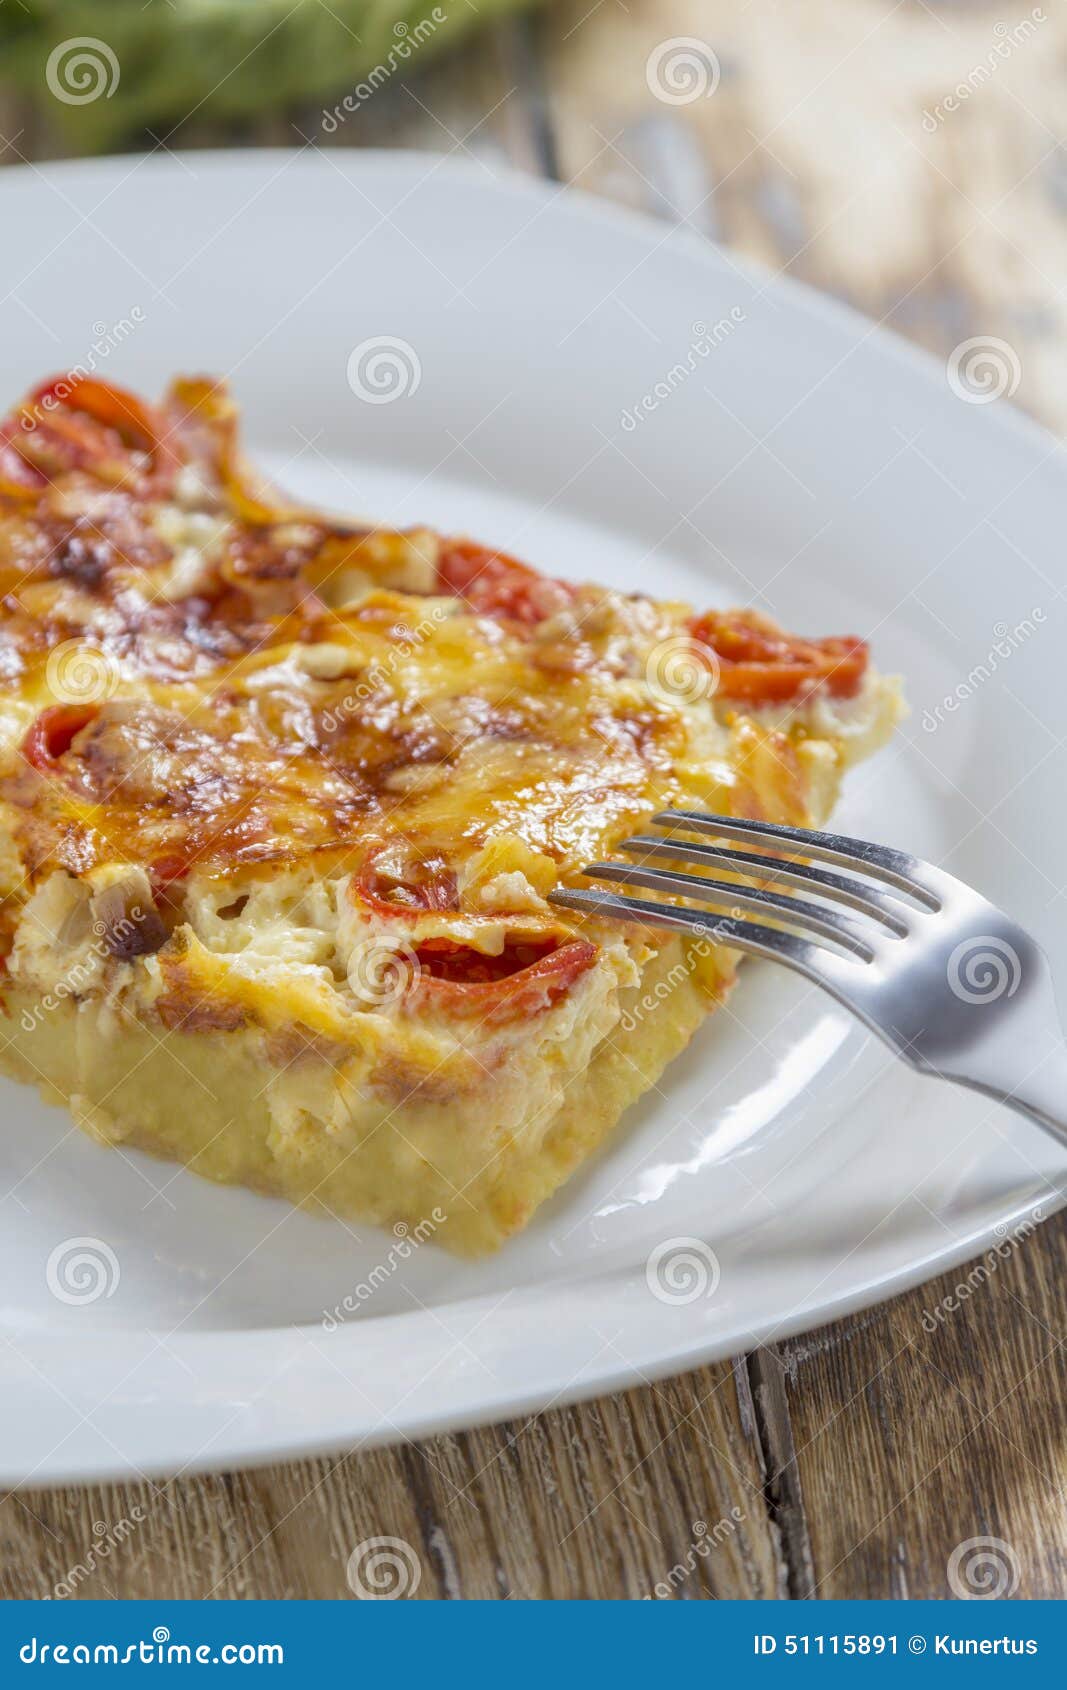 Omlette on plate stock image. Image of cooking, lunch - 51115891